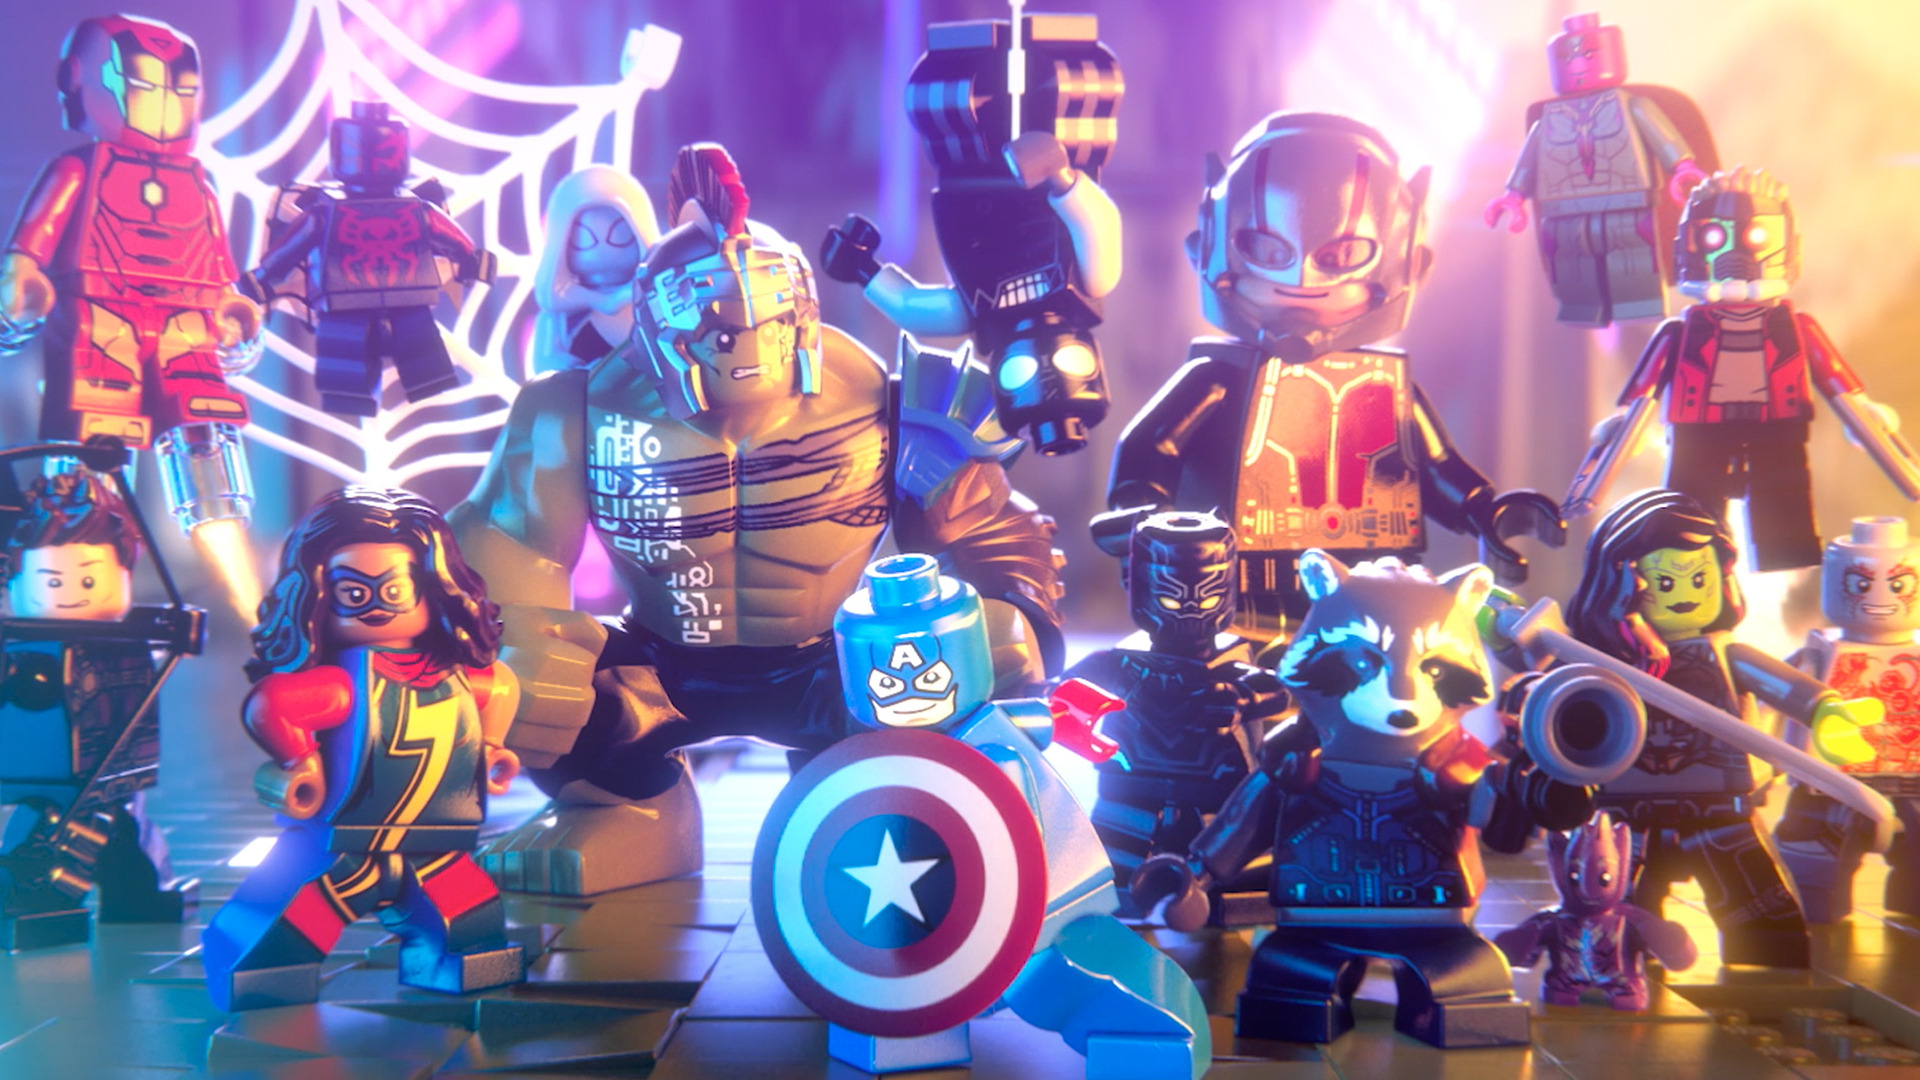 New Lego Marvel Superheroes 2 Trailer Confirms Release Date